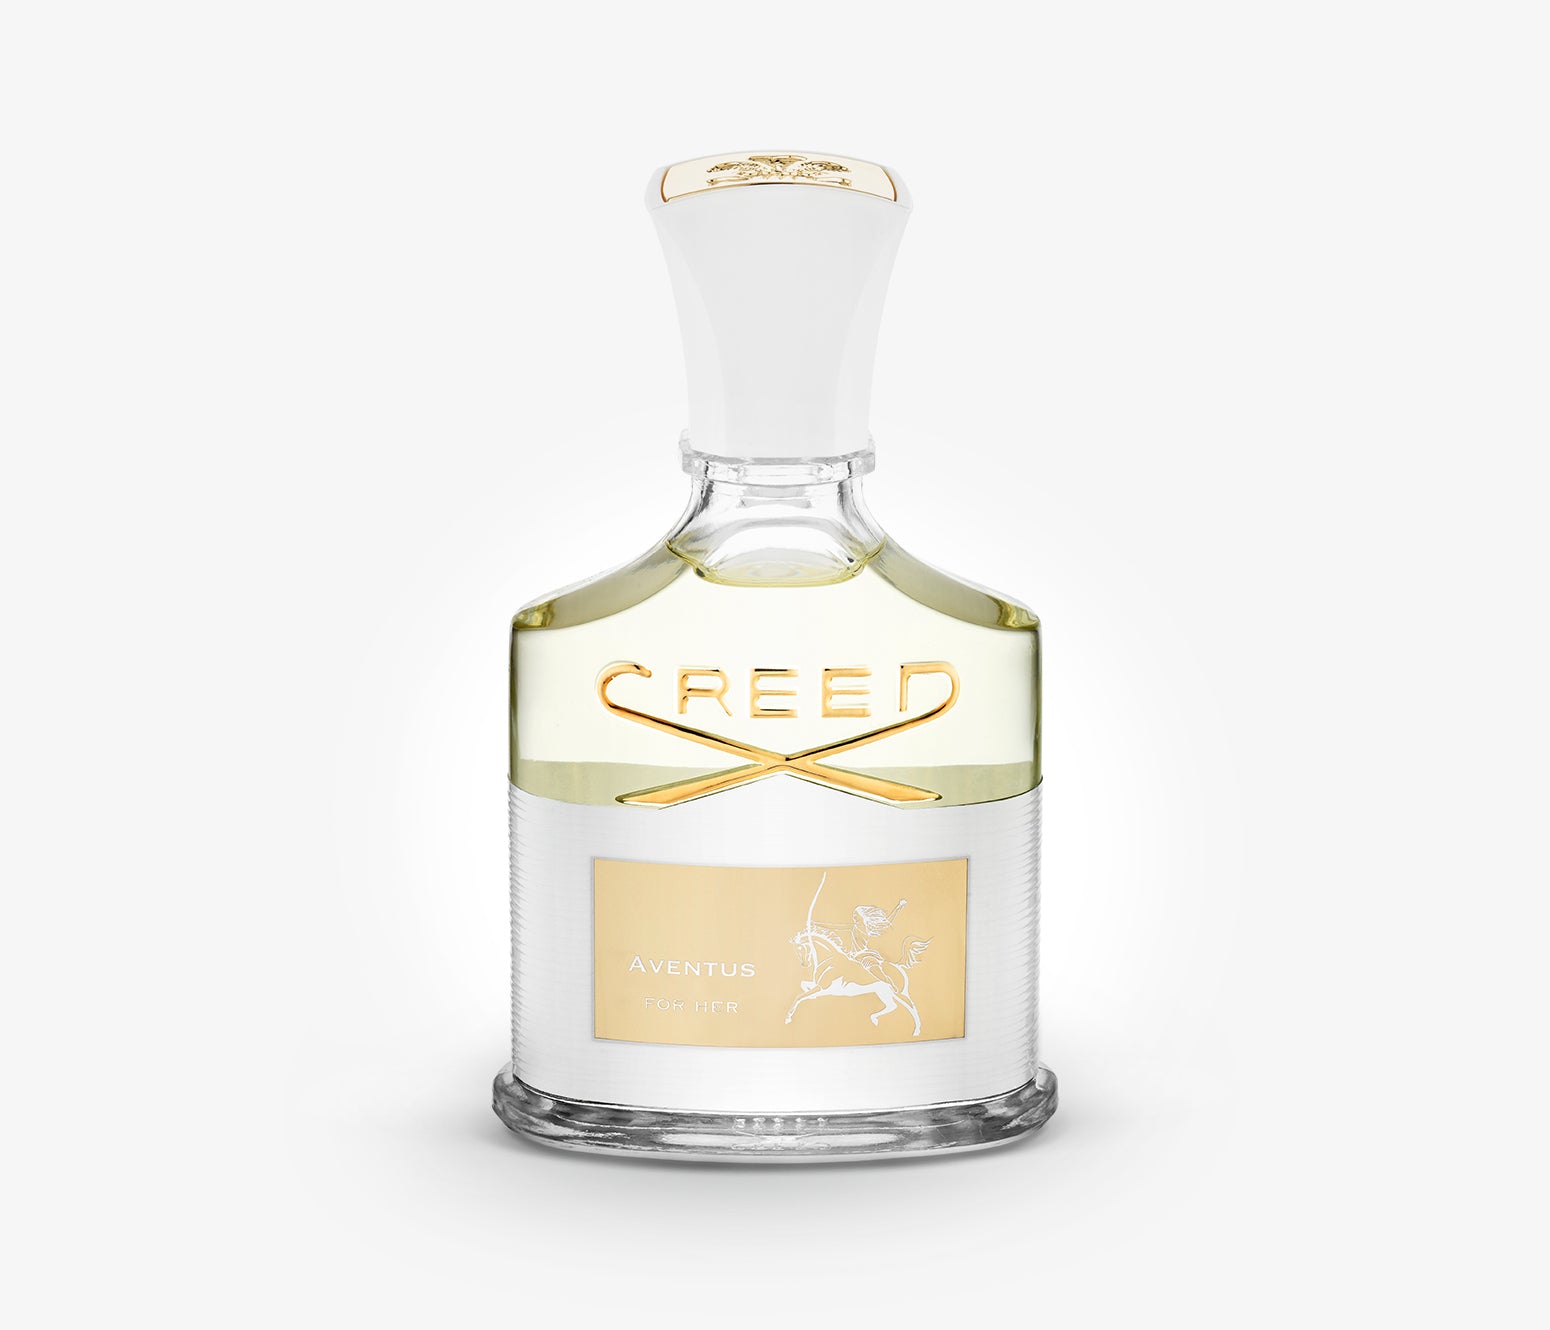 Creed - Aventus for her - 75ml - LSX001 - Product Image - Fragrance - Les Senteurs